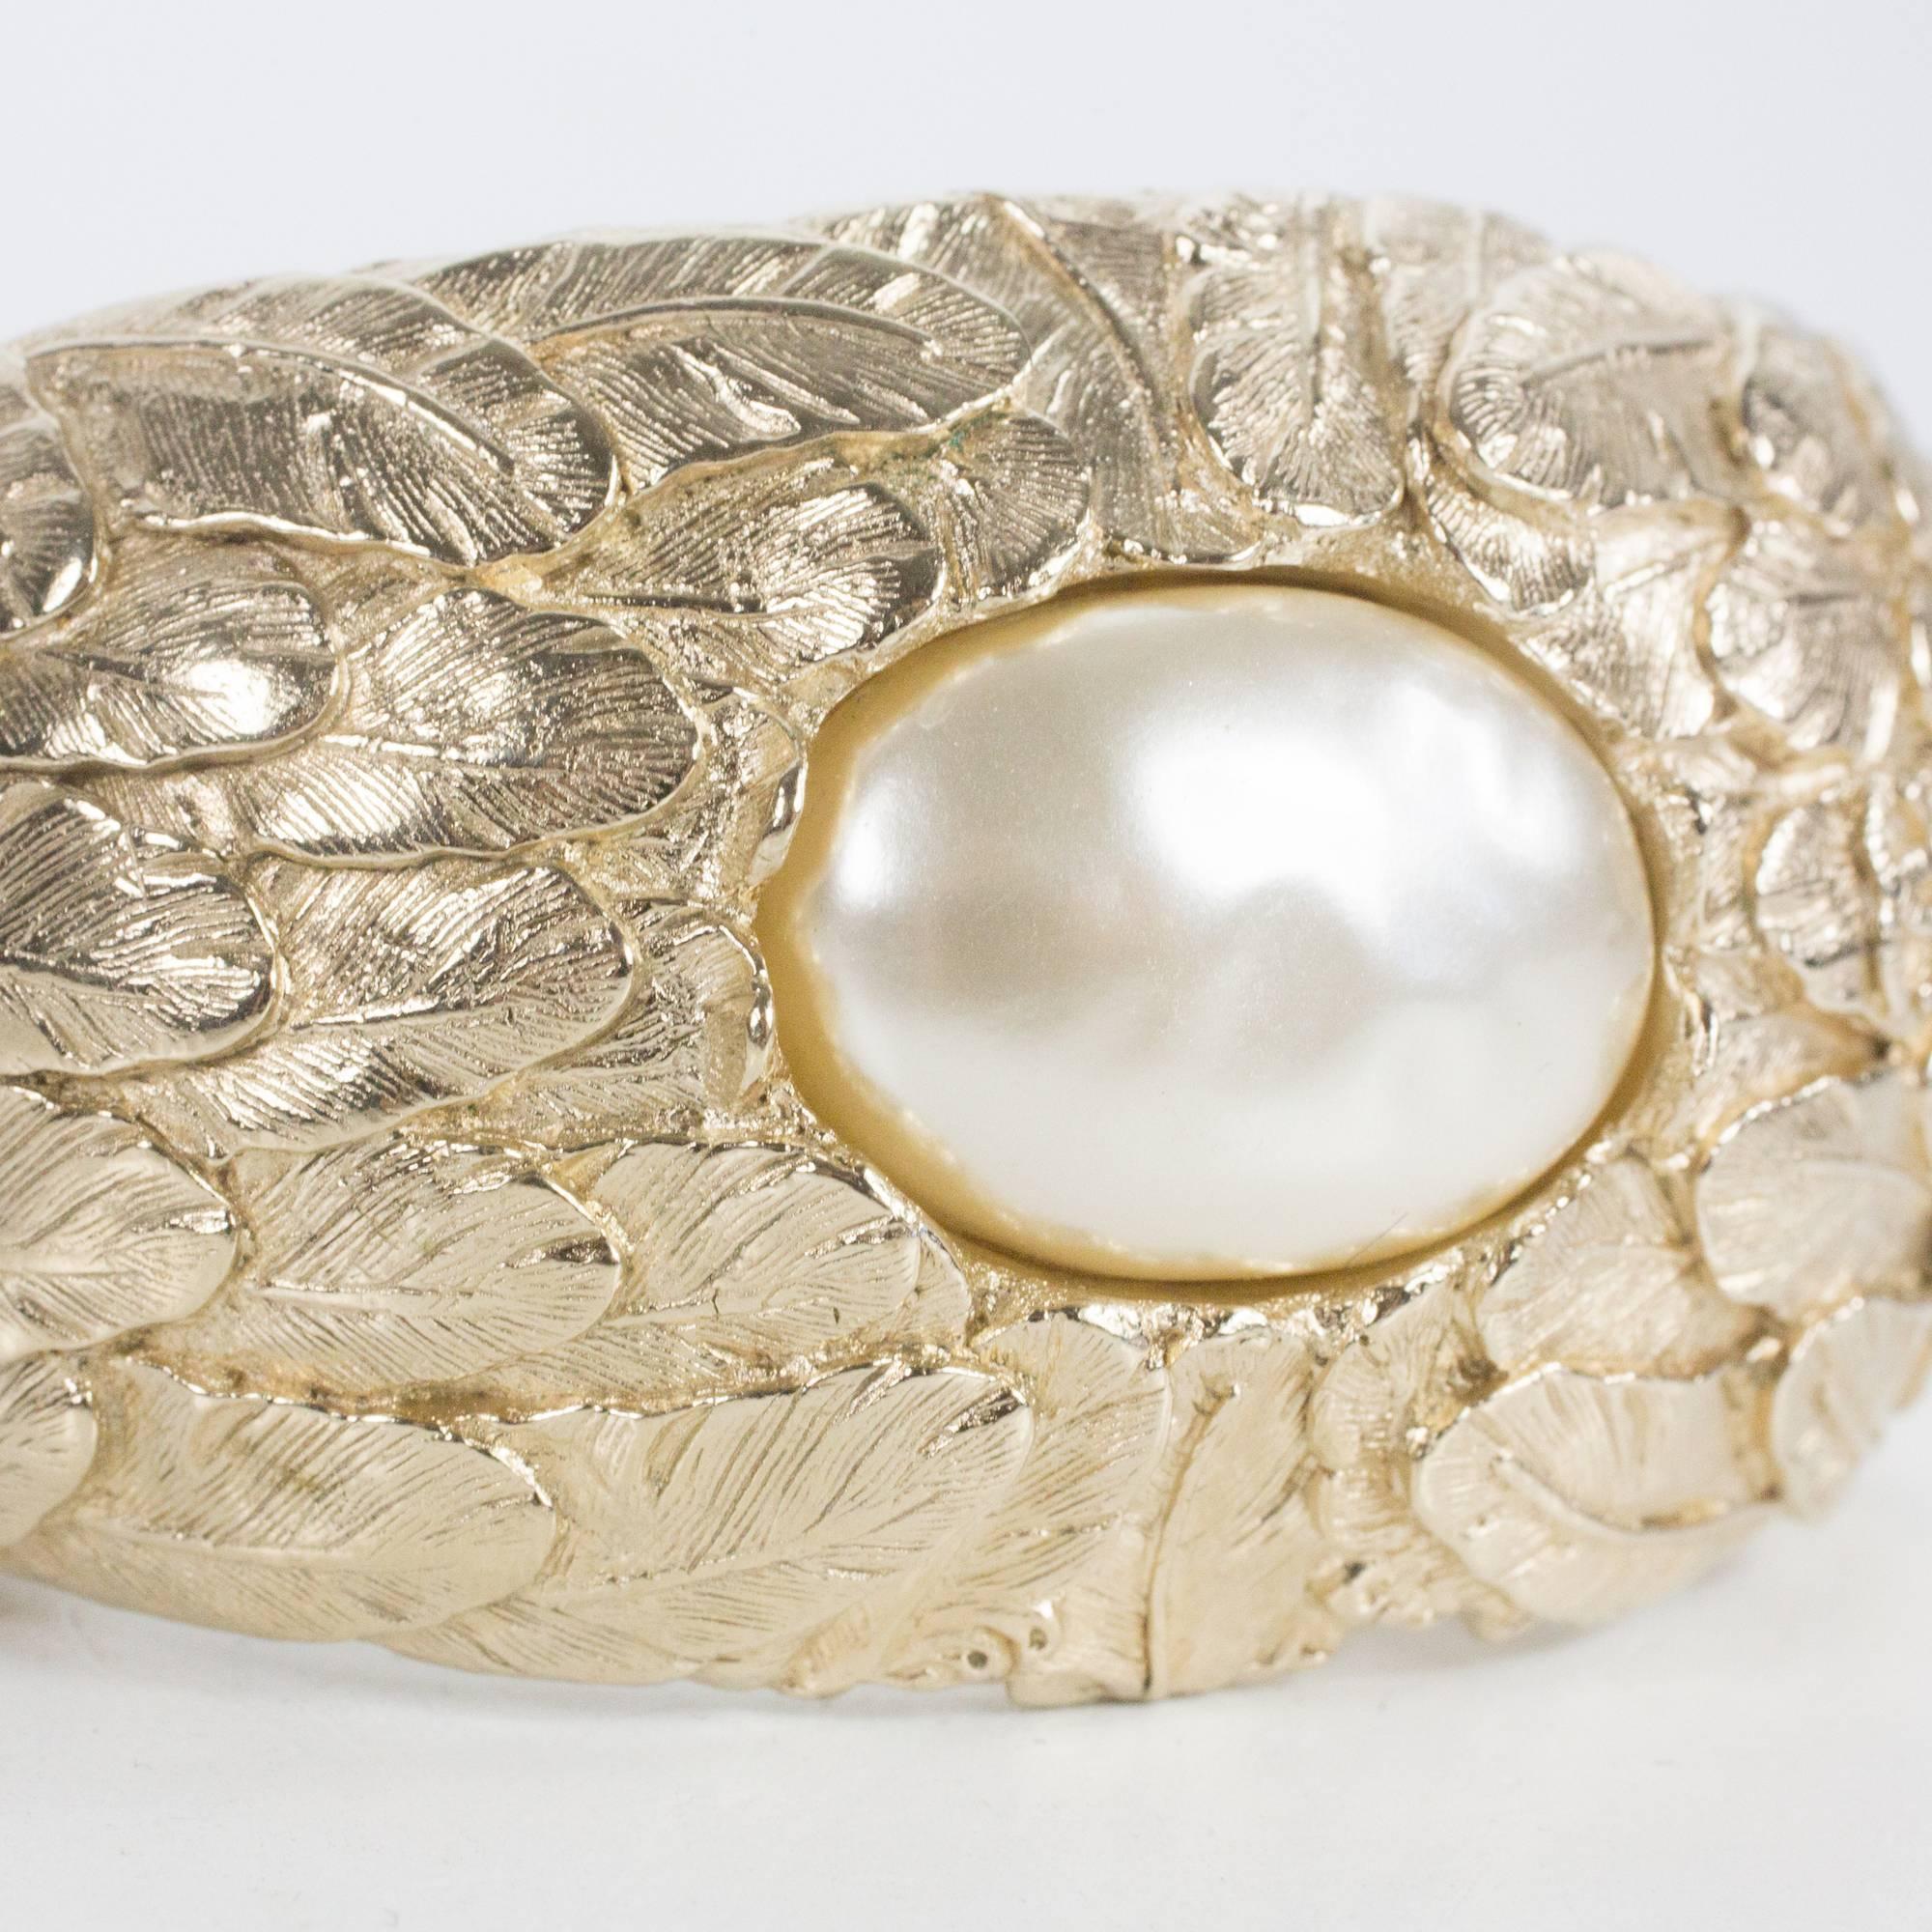 Women's Chanel Bracelet - Cuff Gold Feather Textured Pearl XL Wide Bangle CC Charm 03A